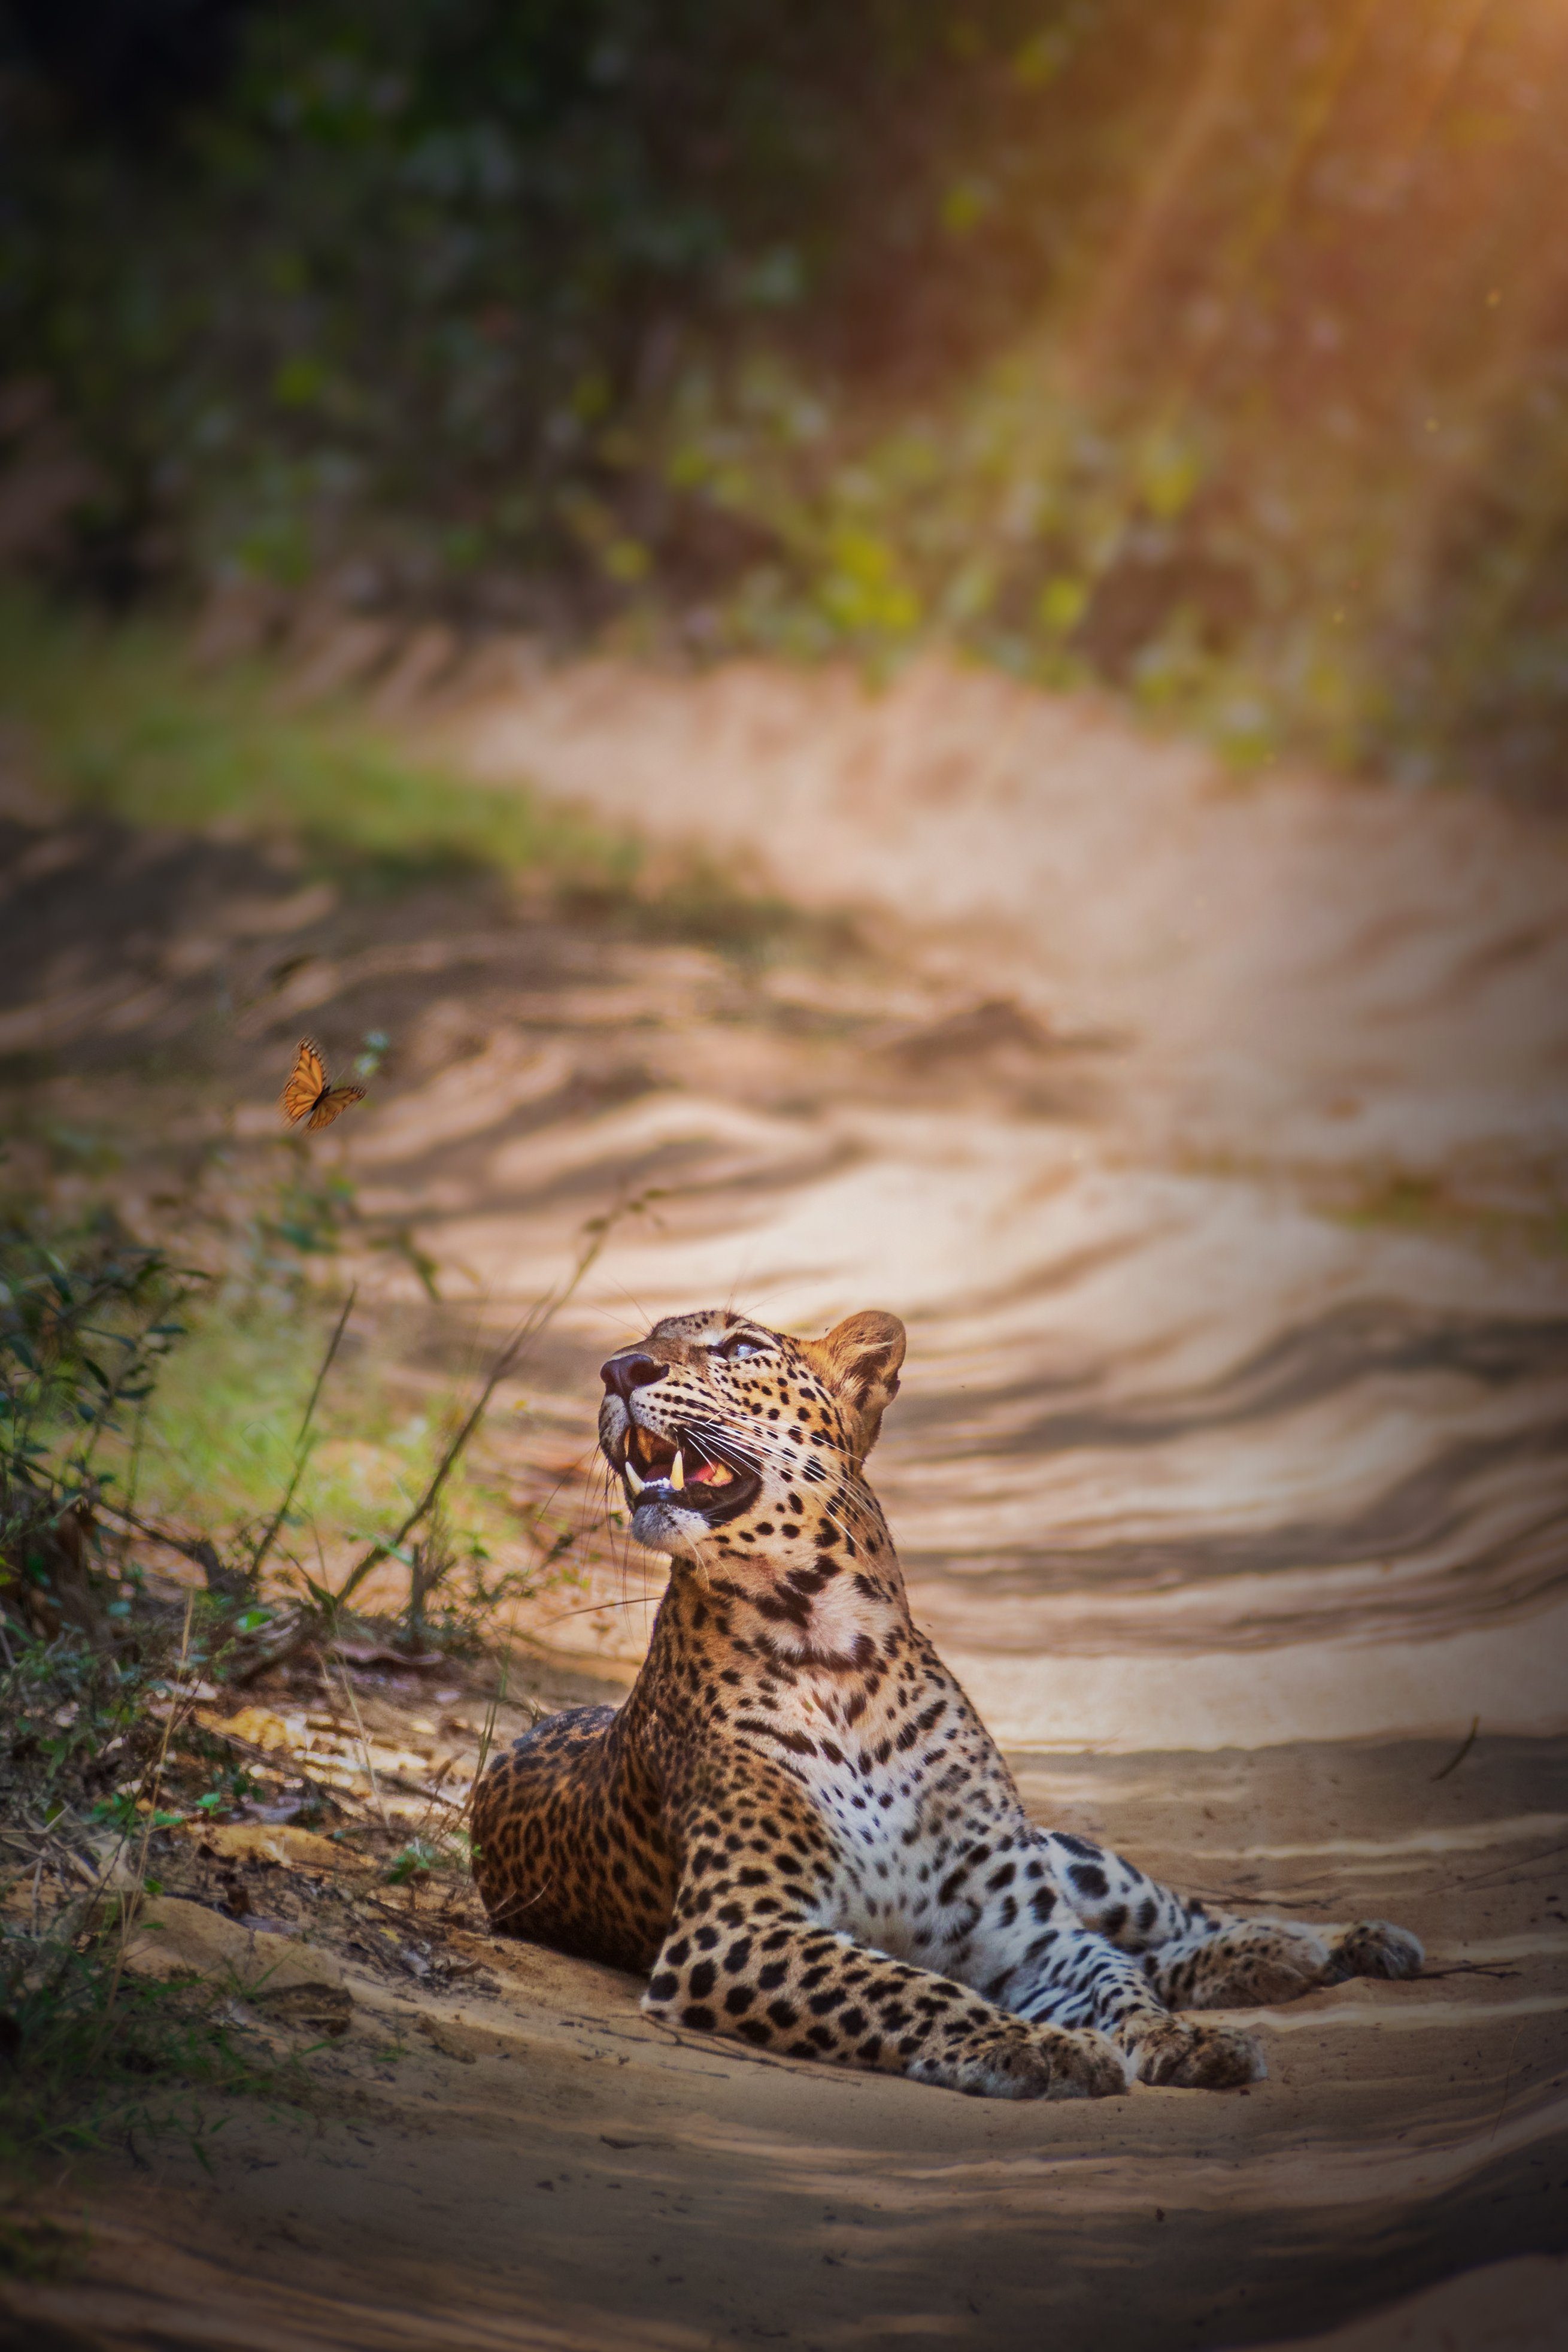 This is Sri Lankan leopard.A endangered cat species.Captured at the national sanctuary of Wilpatthu in Sri Lanka. Captured in a safari trip in 2019